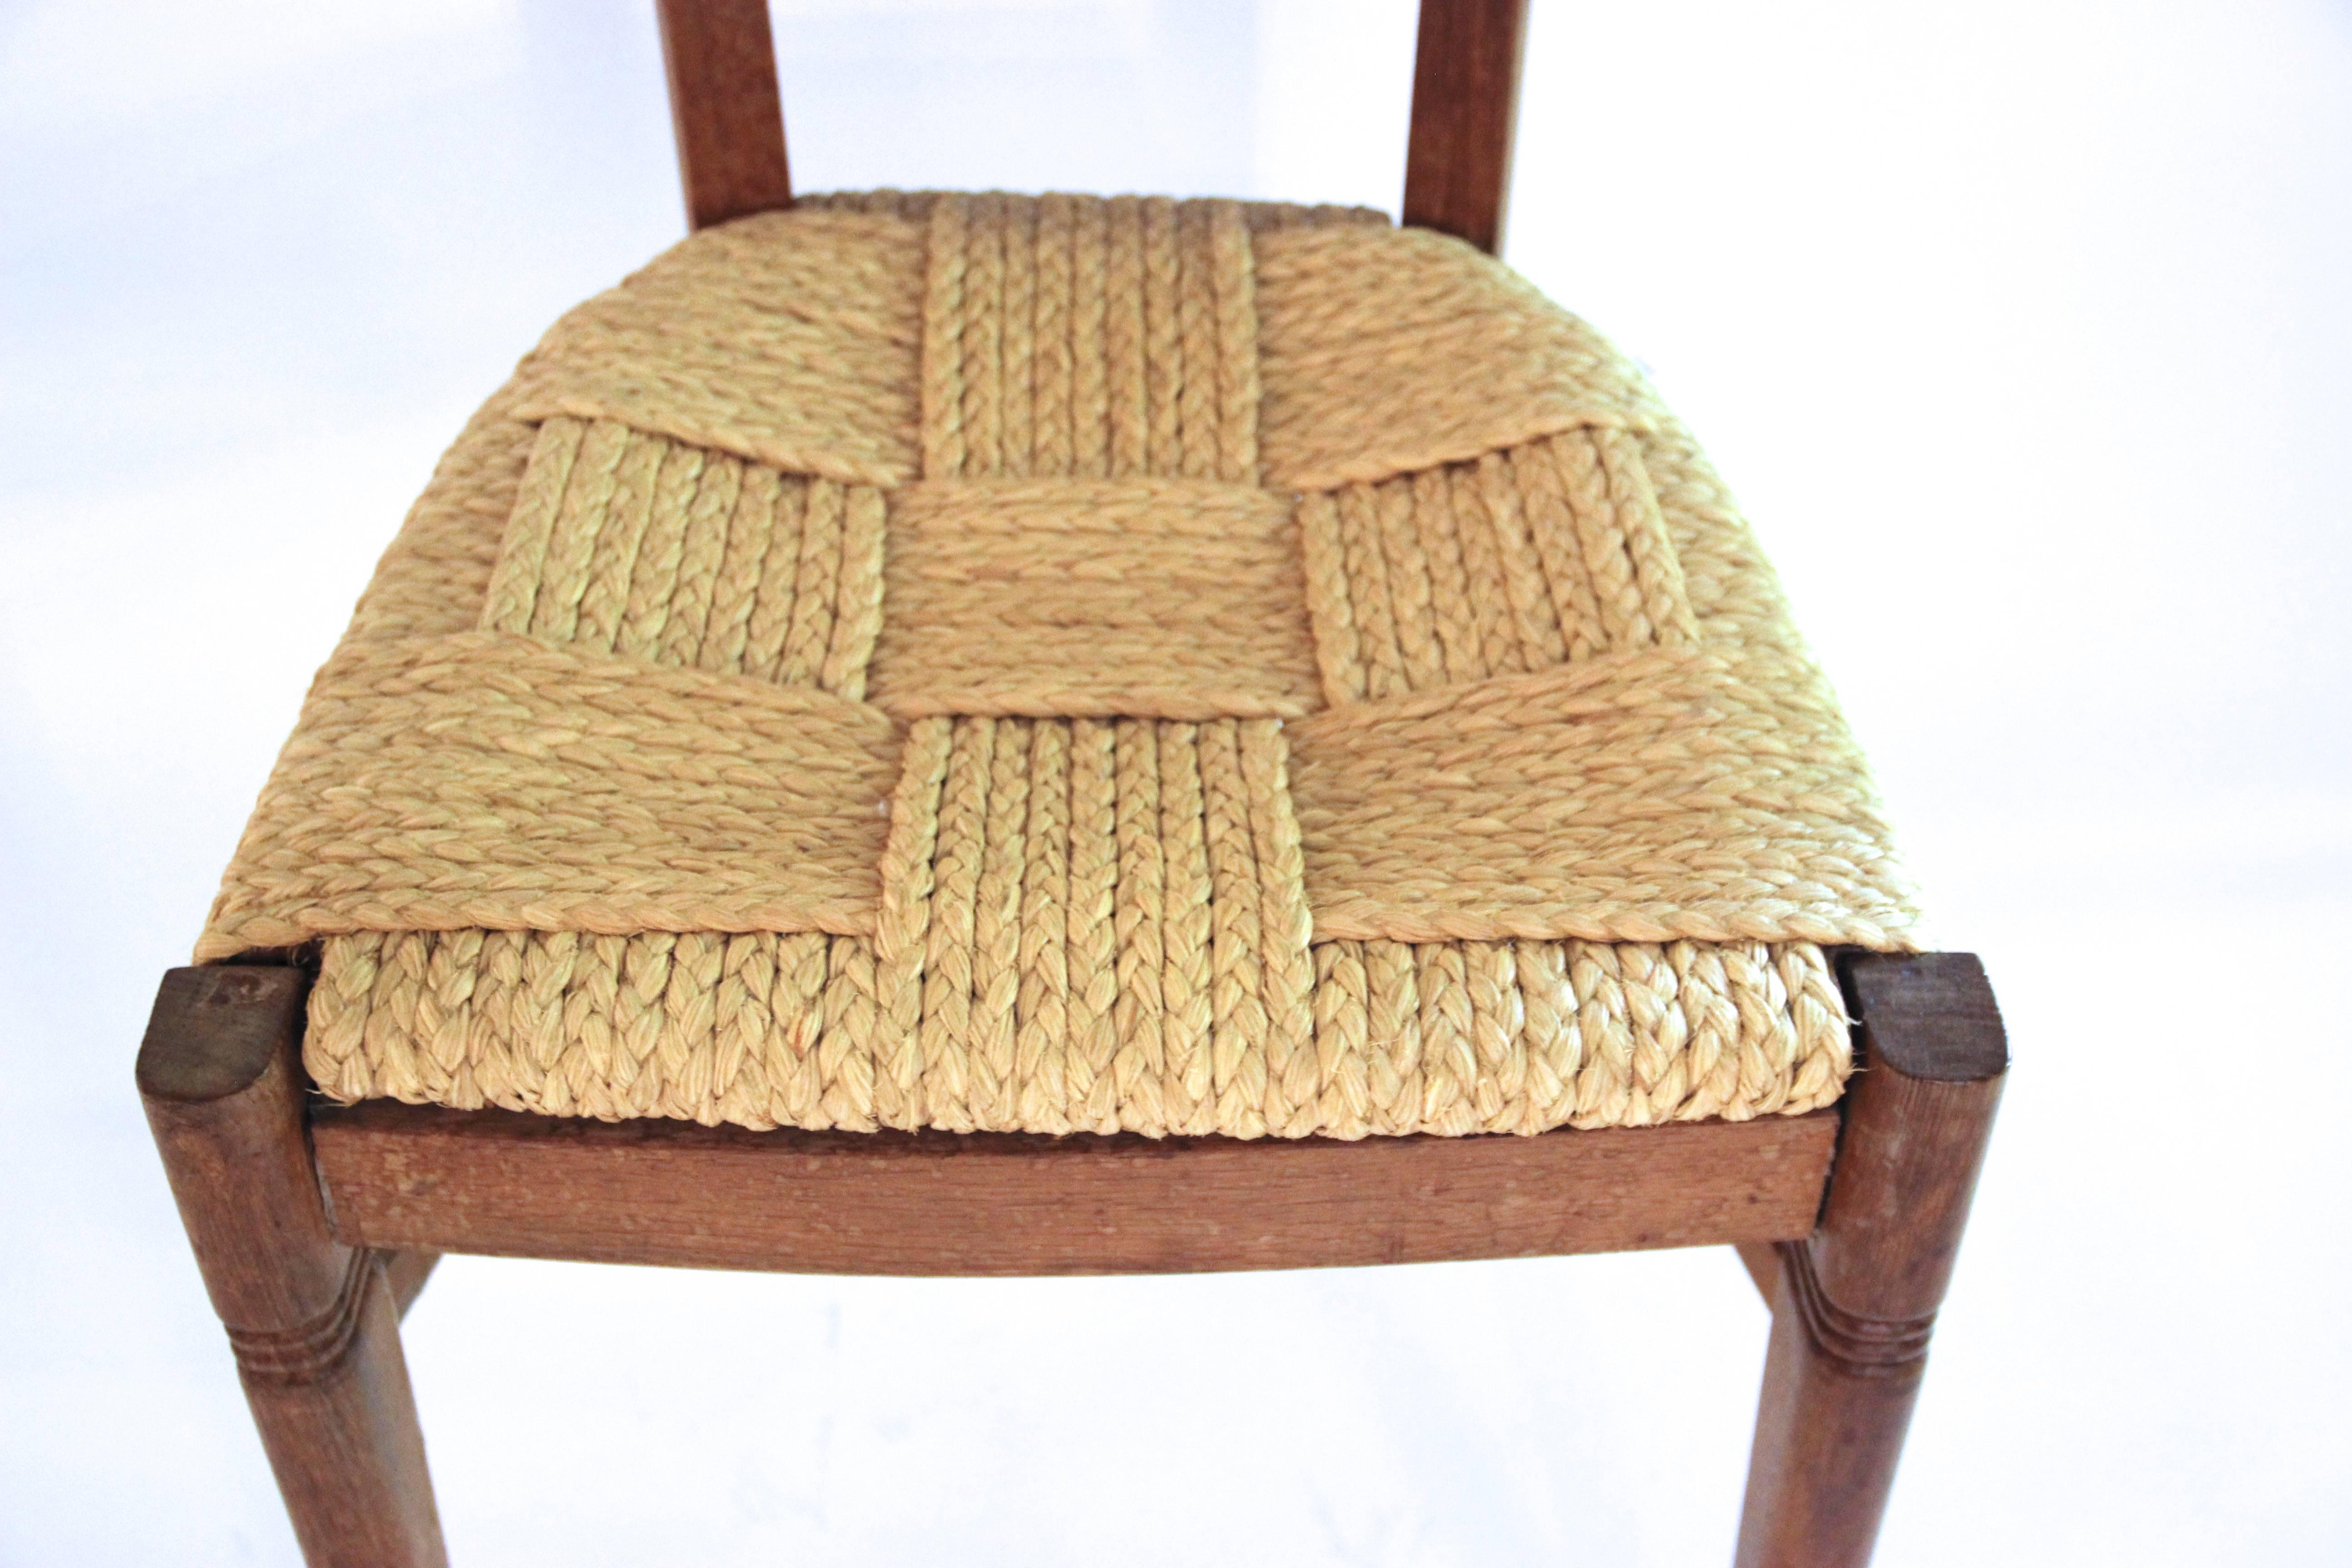 Audoux-Minet,
Suite of four chairs.
Rattan and wood,
circa 1970, France.
Measures: Height 110 cm, seat height 45 cm, width 45 cm, depth 43 cm.